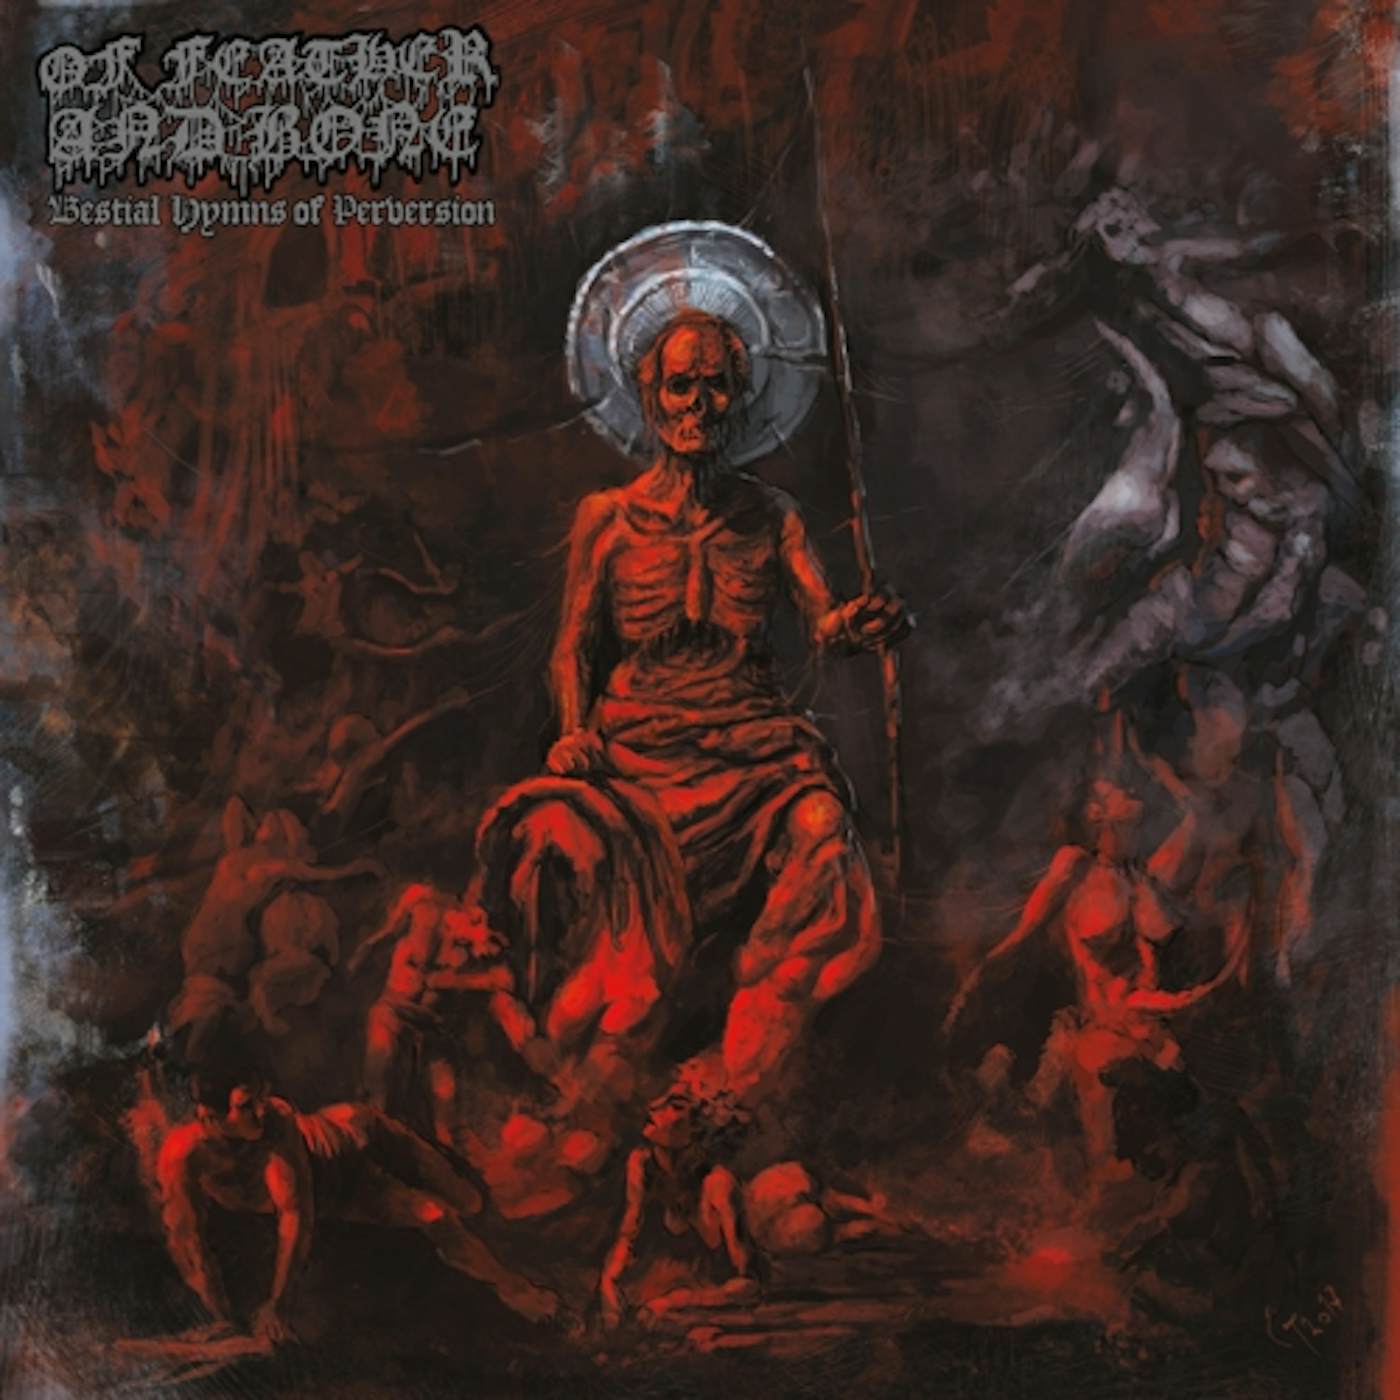 Of Feather And Bone Bestial Hymns of Perversion Vinyl Record